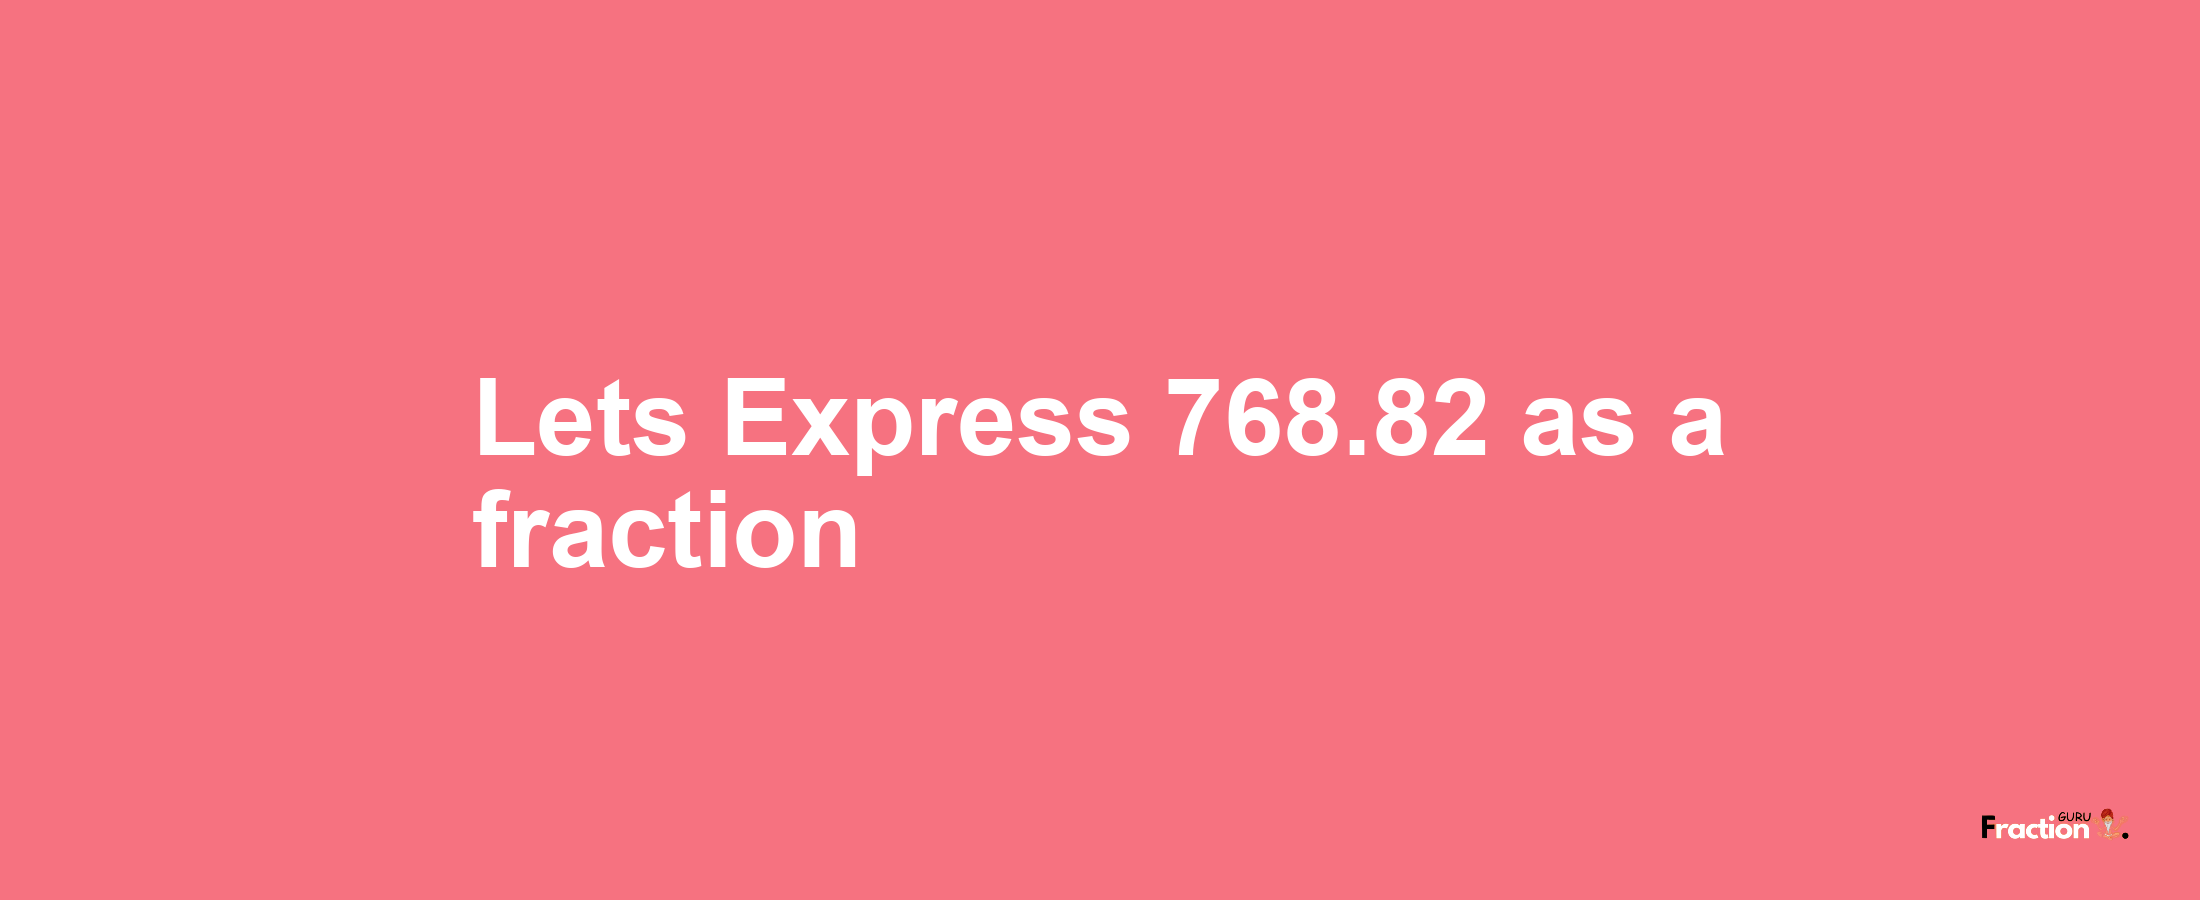 Lets Express 768.82 as afraction